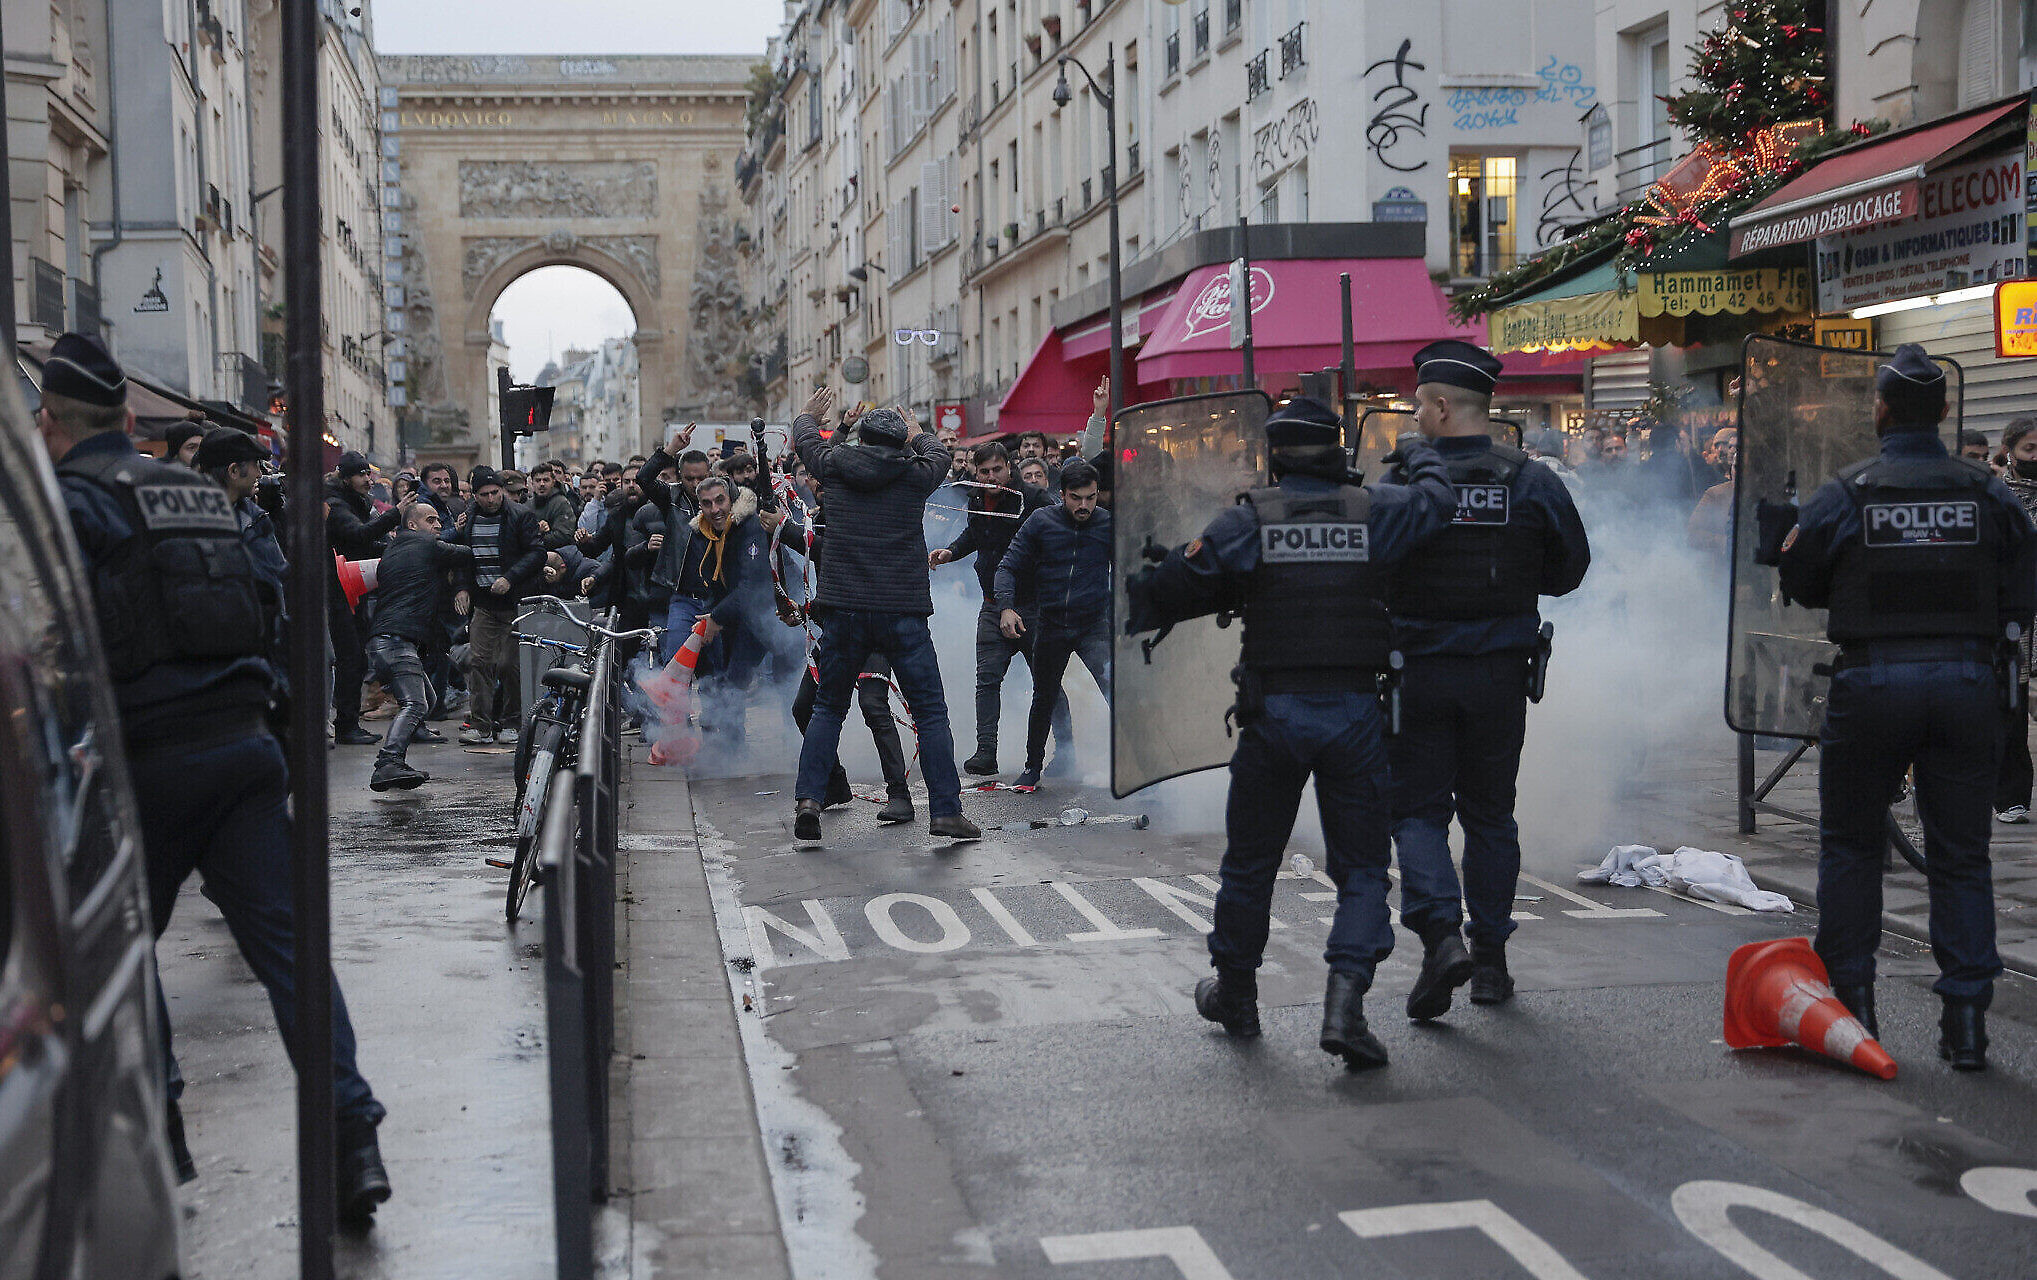 Protesters Riots In Paris After Deadly Attack On The Kurdish Community